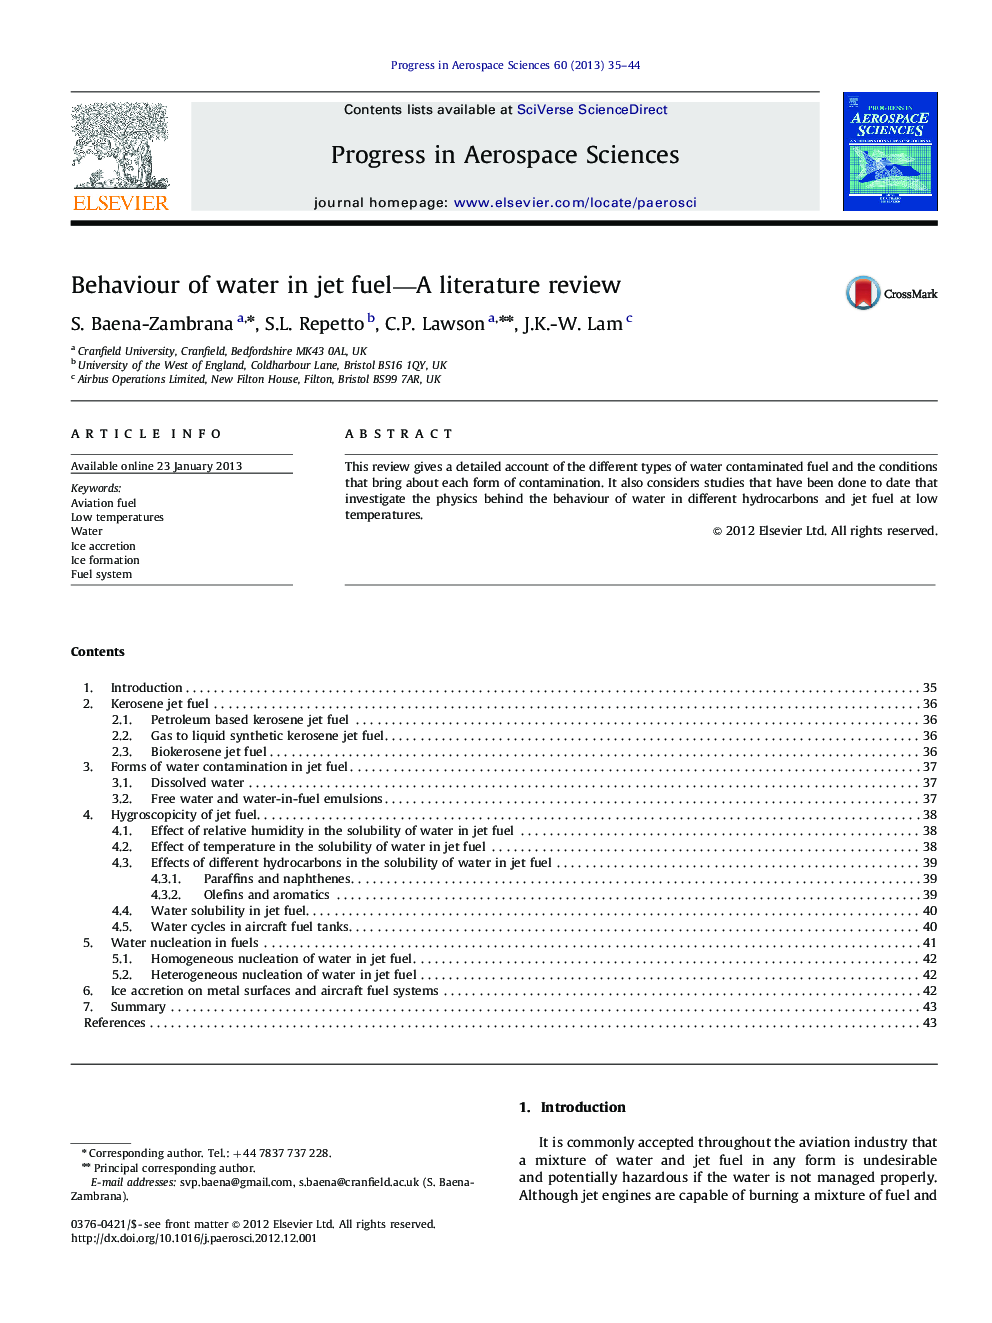 Behaviour of water in jet fuel—A literature review